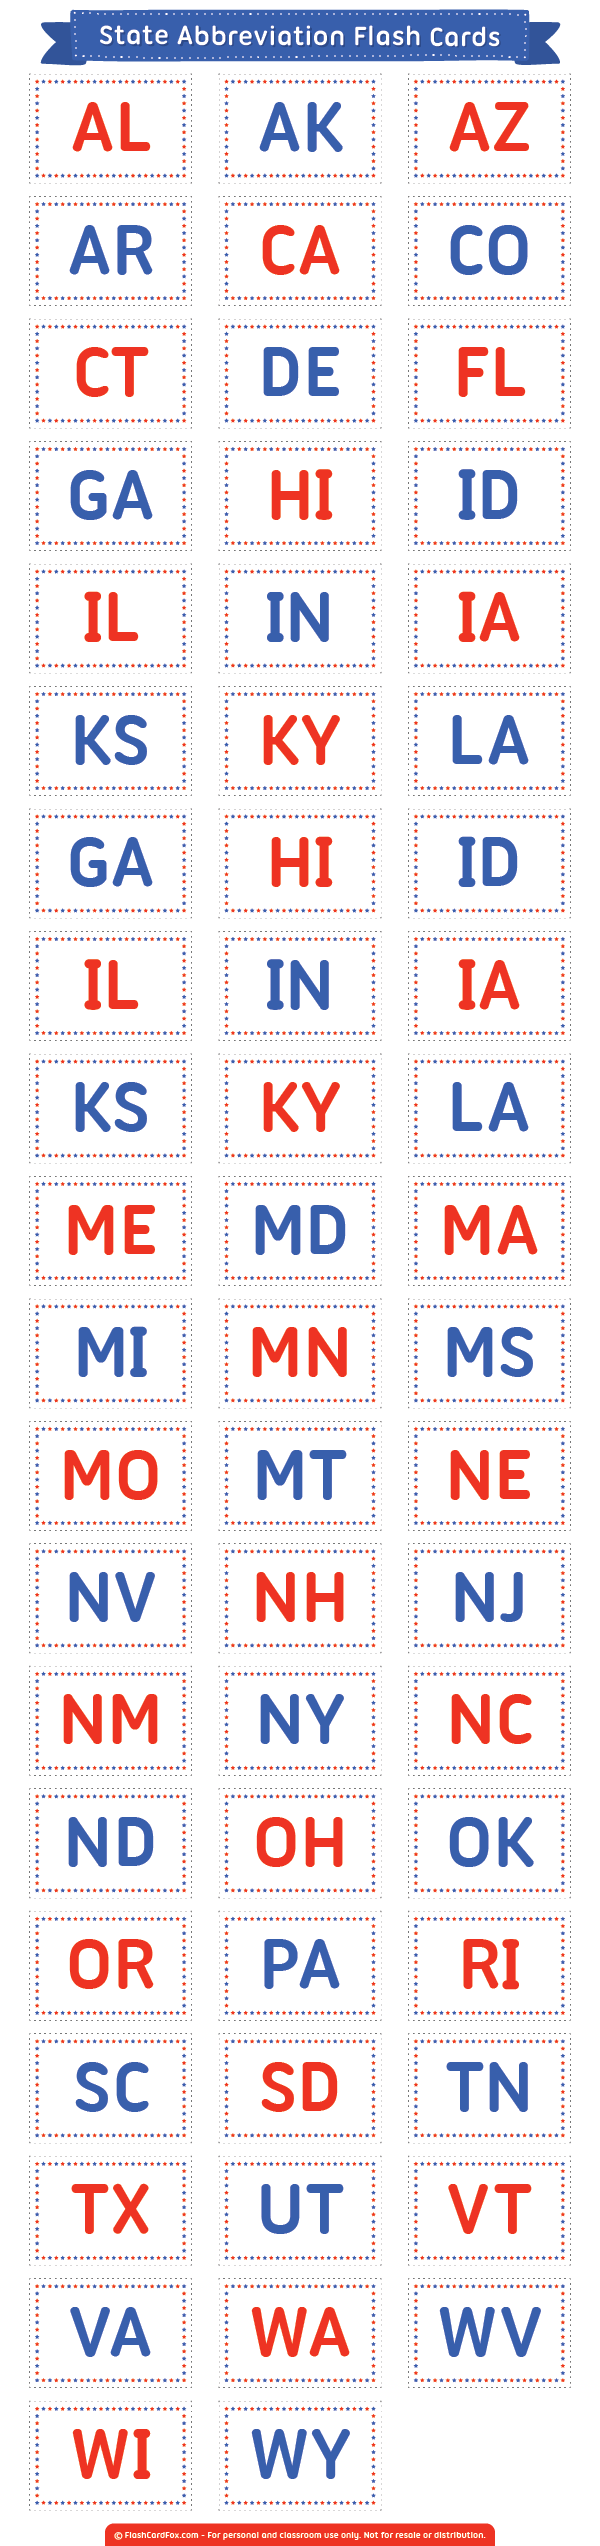 Free Printable State Abbreviation Flash Cards